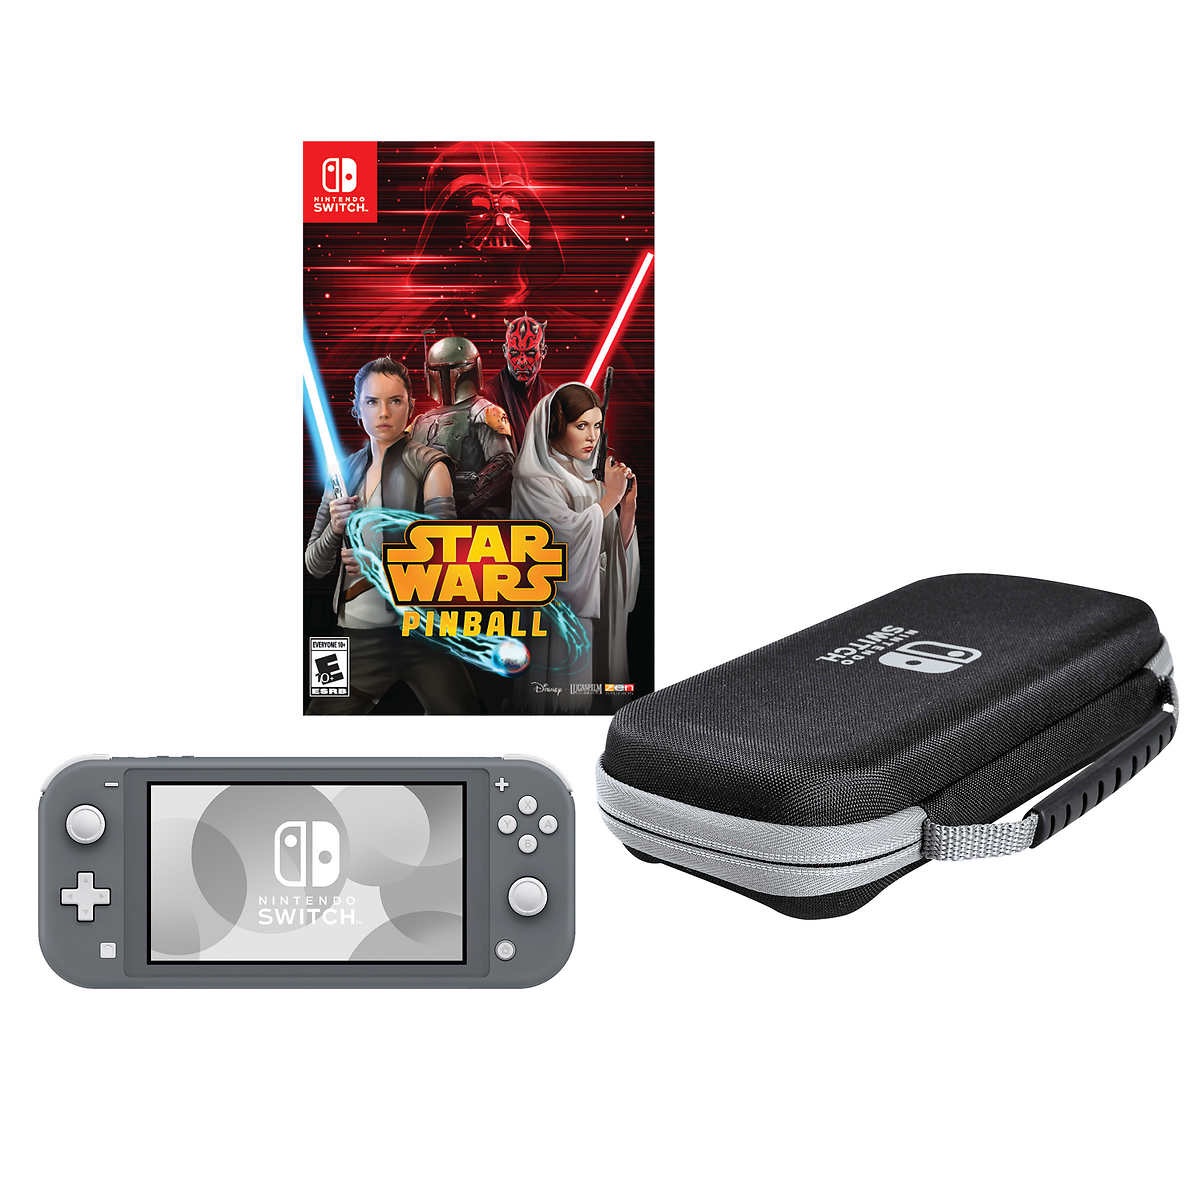 Nintendo Switch Lite with Star Wars Pinball and Case游戏机套装